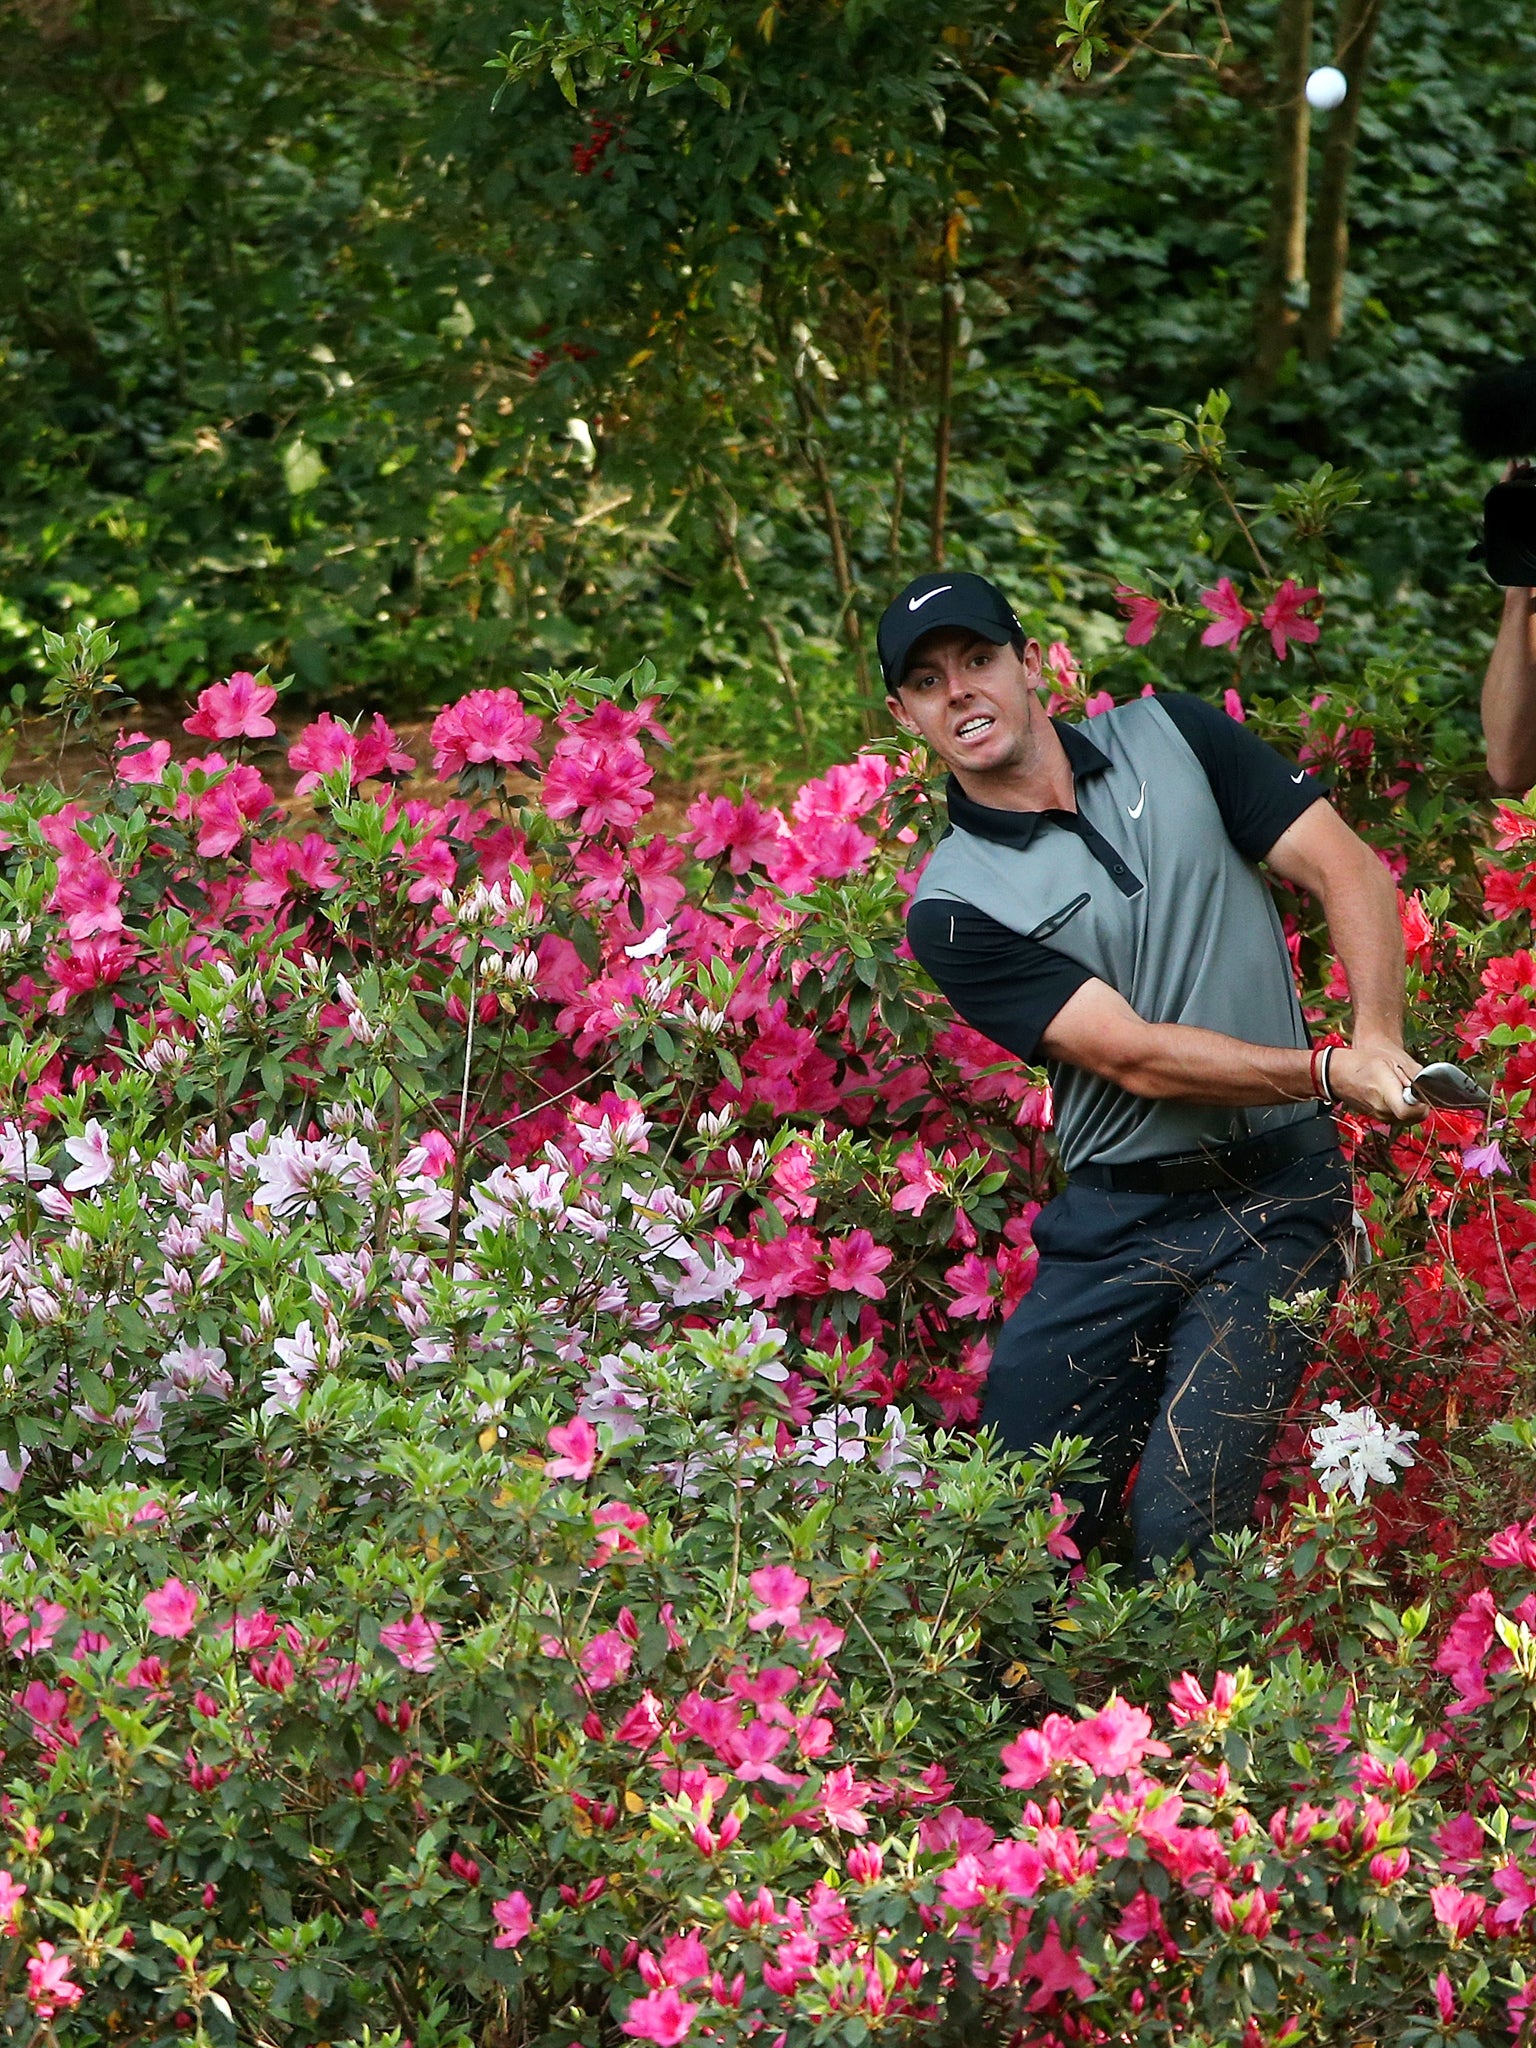 McIlroy visited some seldom-seen parts of the course on the 10th and 13th, the latter after his ball hit a sprinkler and bounded into the azaleas which give the hole its name.